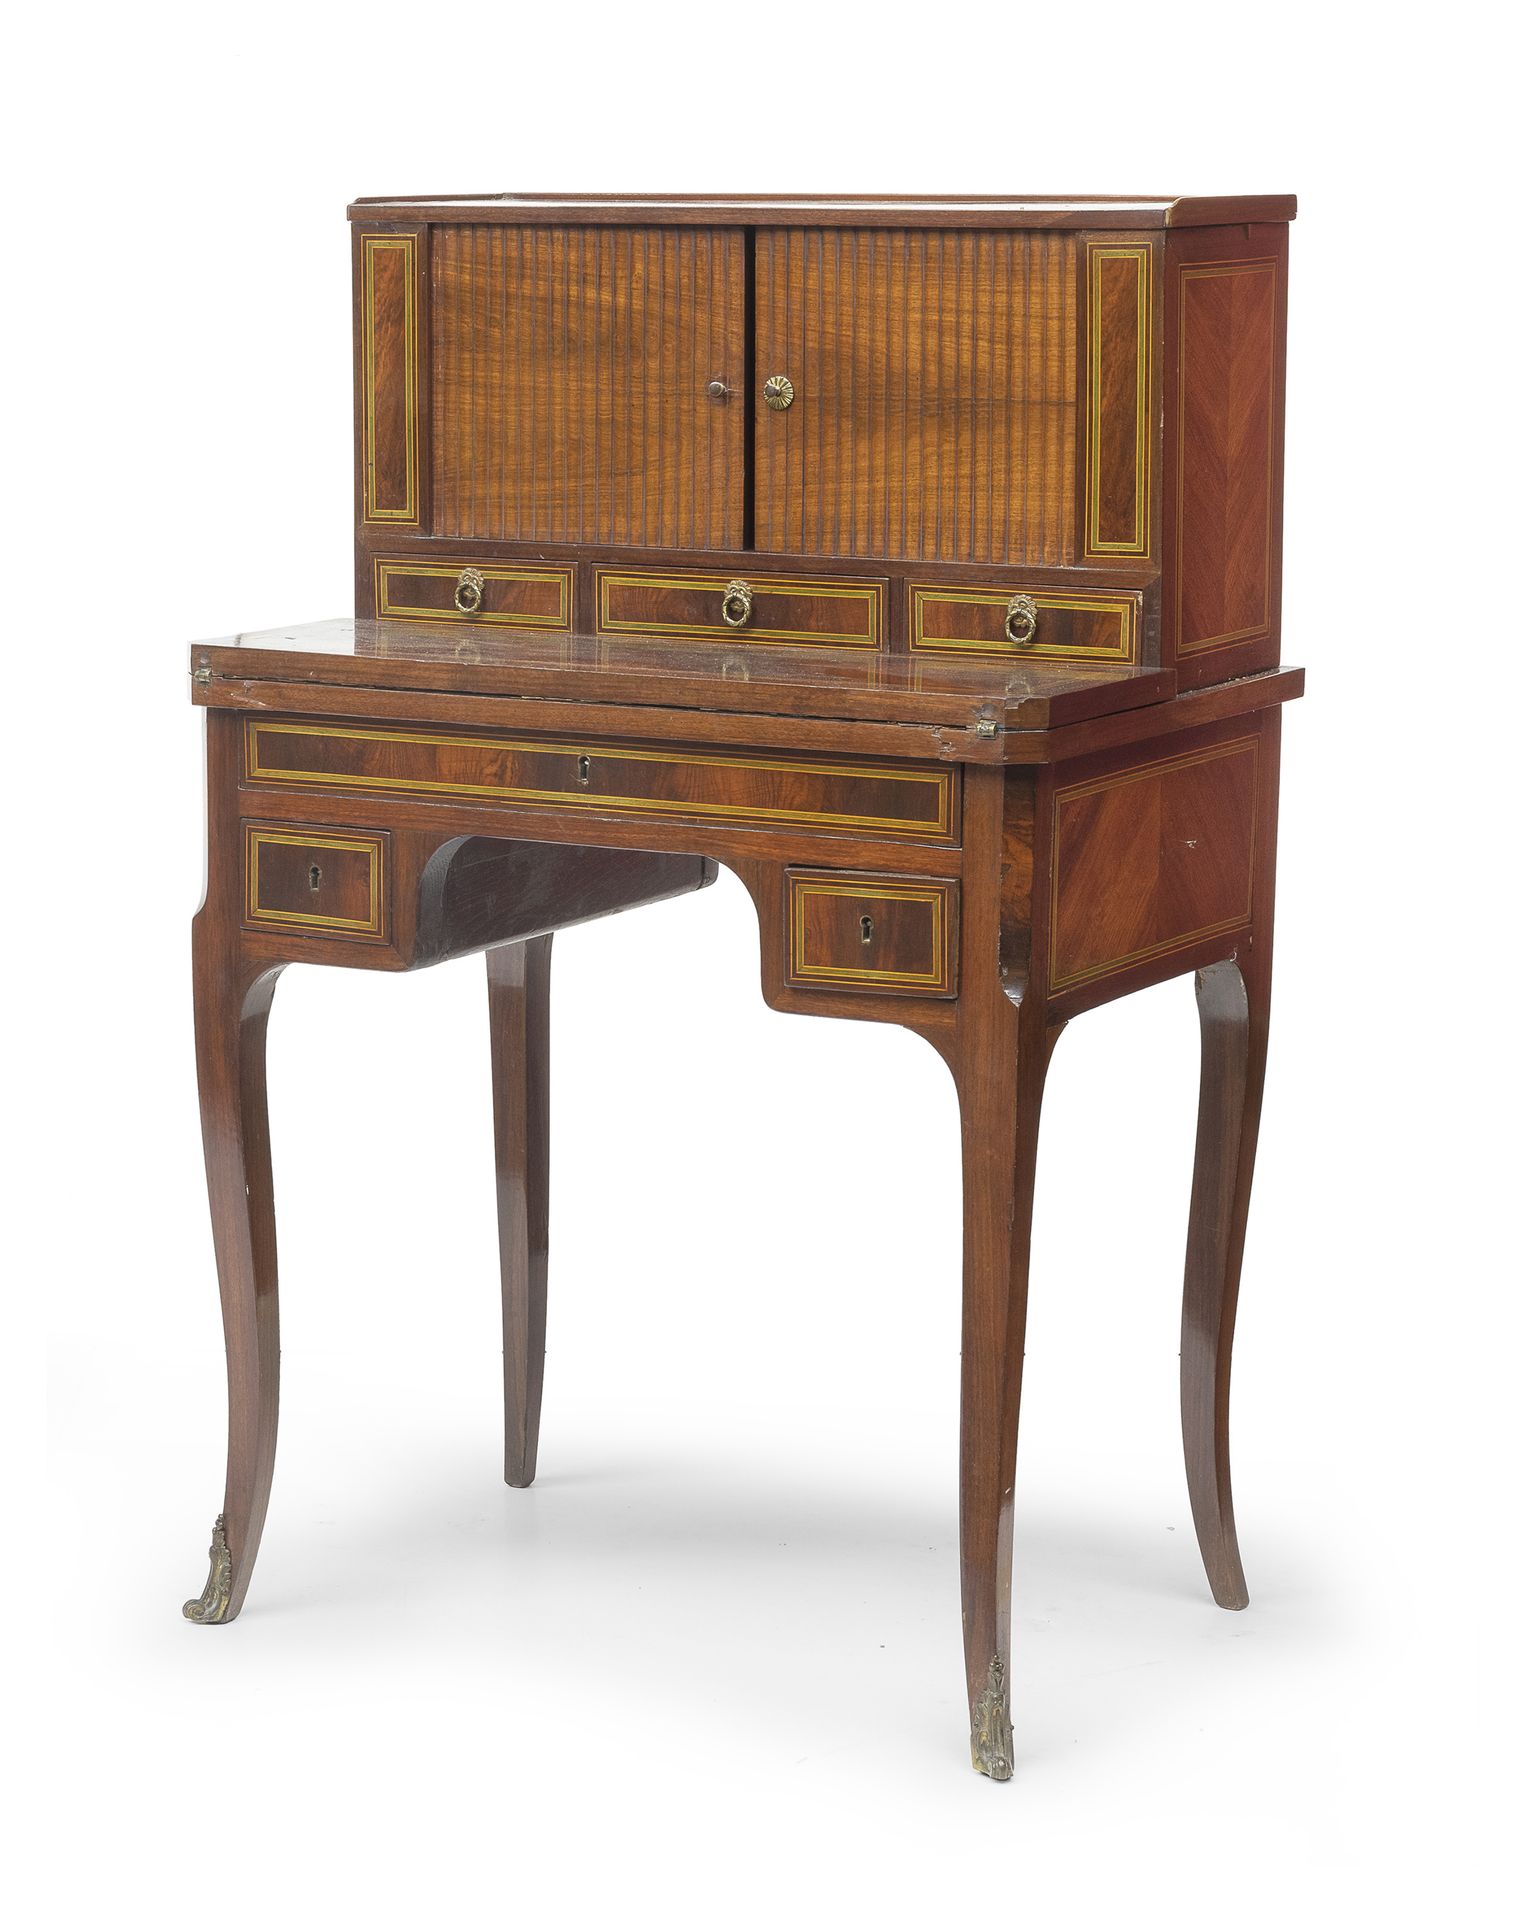 Null SMALL DESK WITH HUTCH, FRANCE FIRST HALF 19TH CENTURY